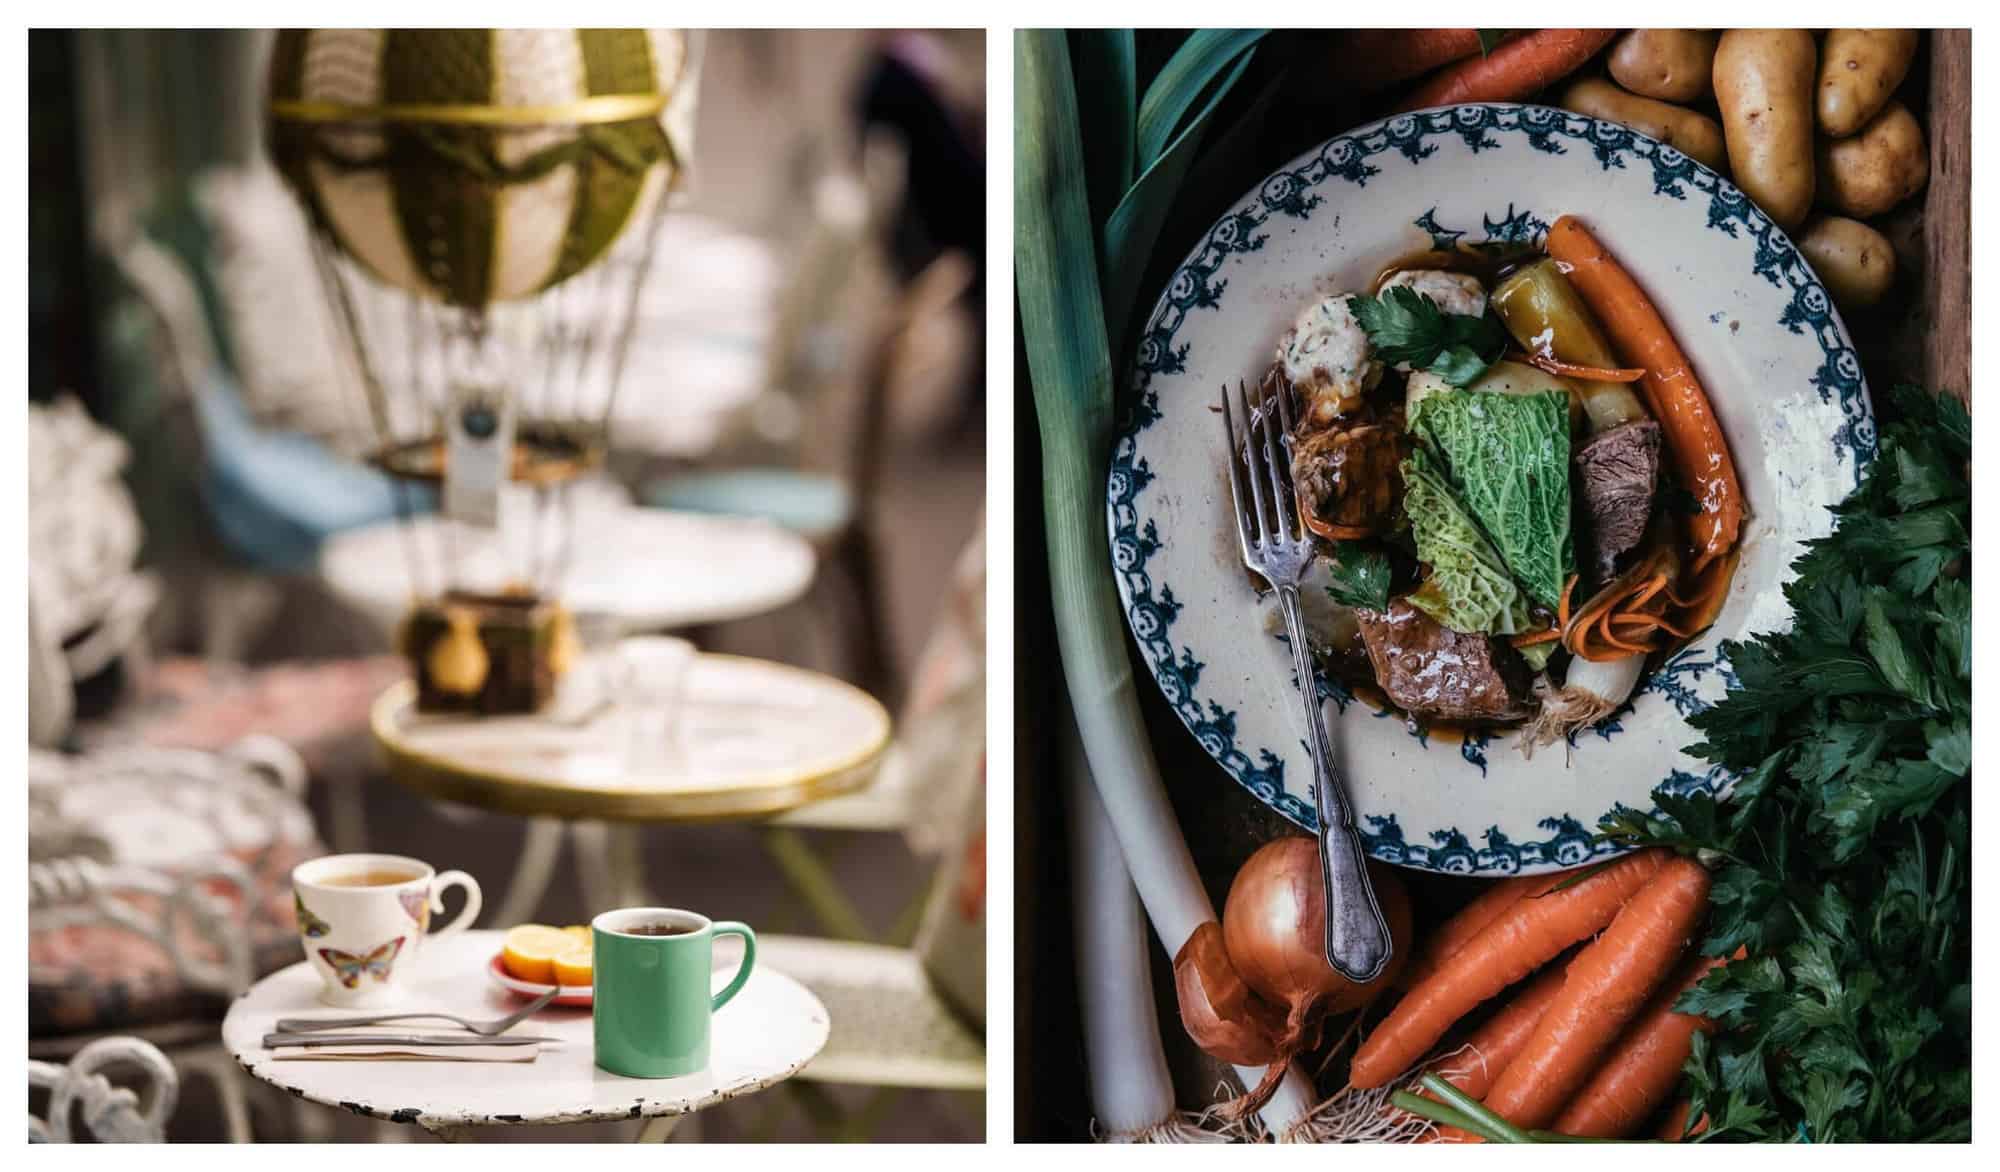 Left: A morning table with two mugs of coffee on top of a white circular table. Right: A beef dish with orange carrots and green lettuce, served on a circular plate.